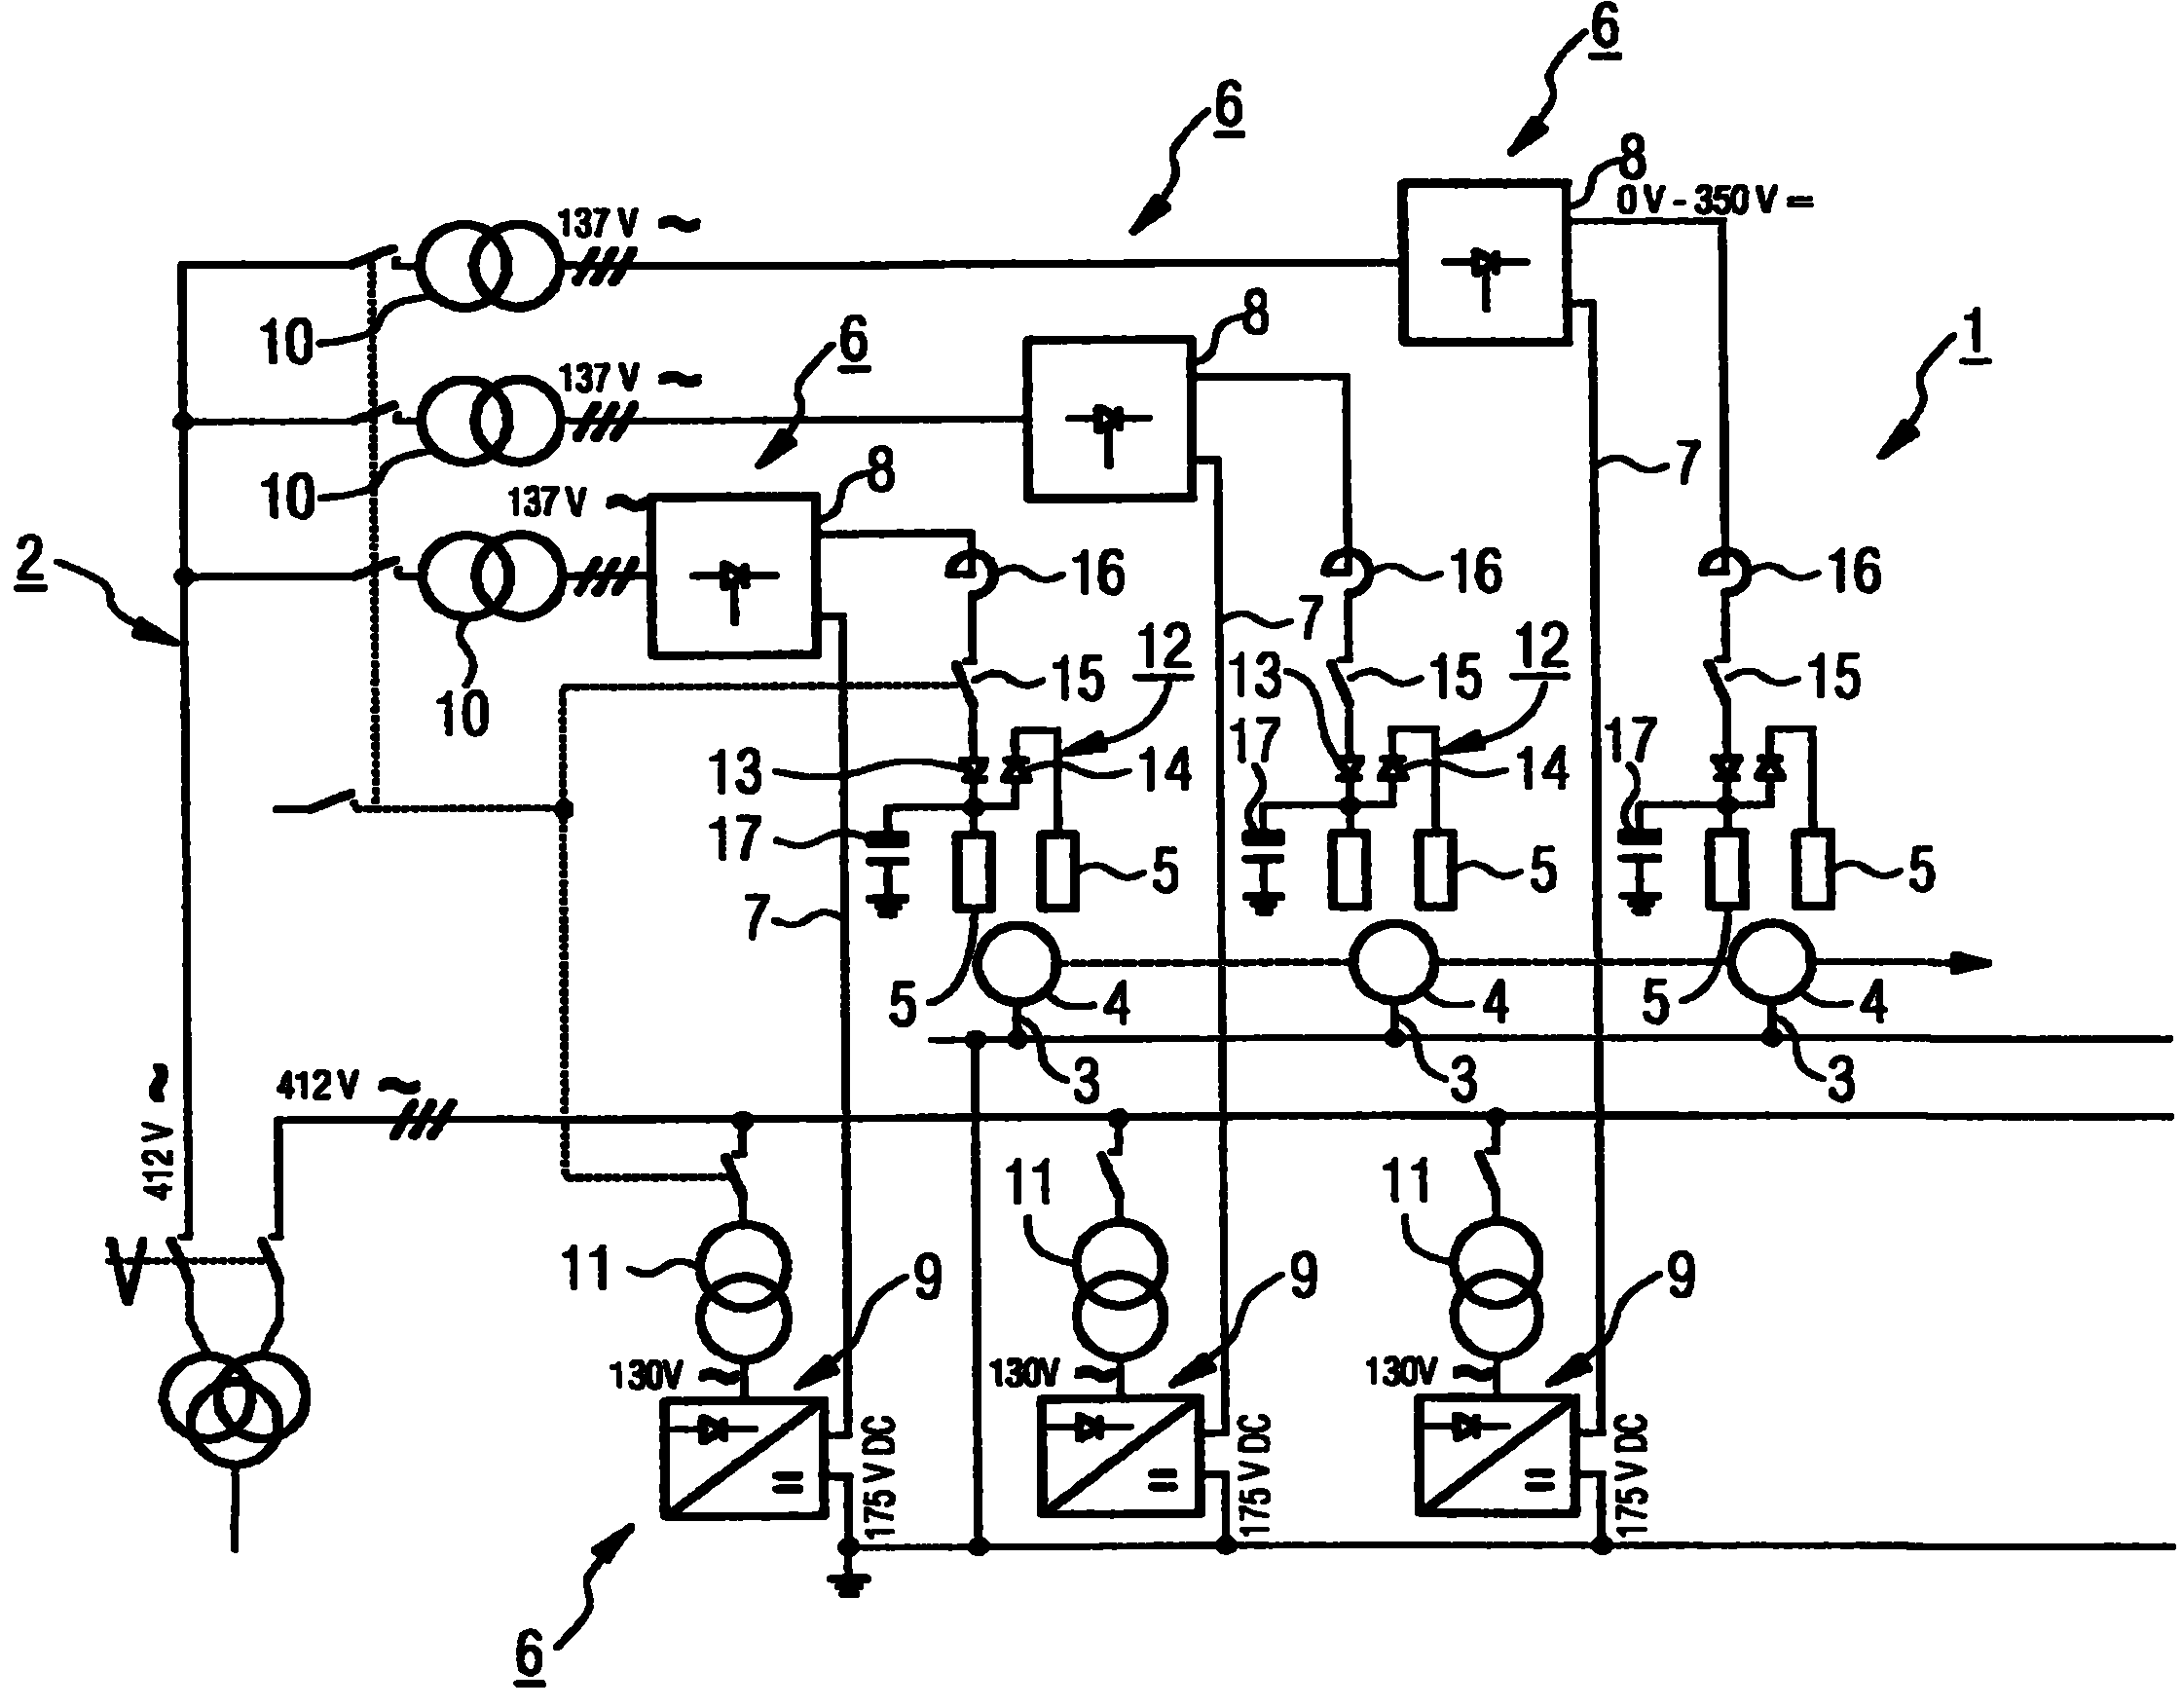 Power control device of a power network of an electrochemical coating facility